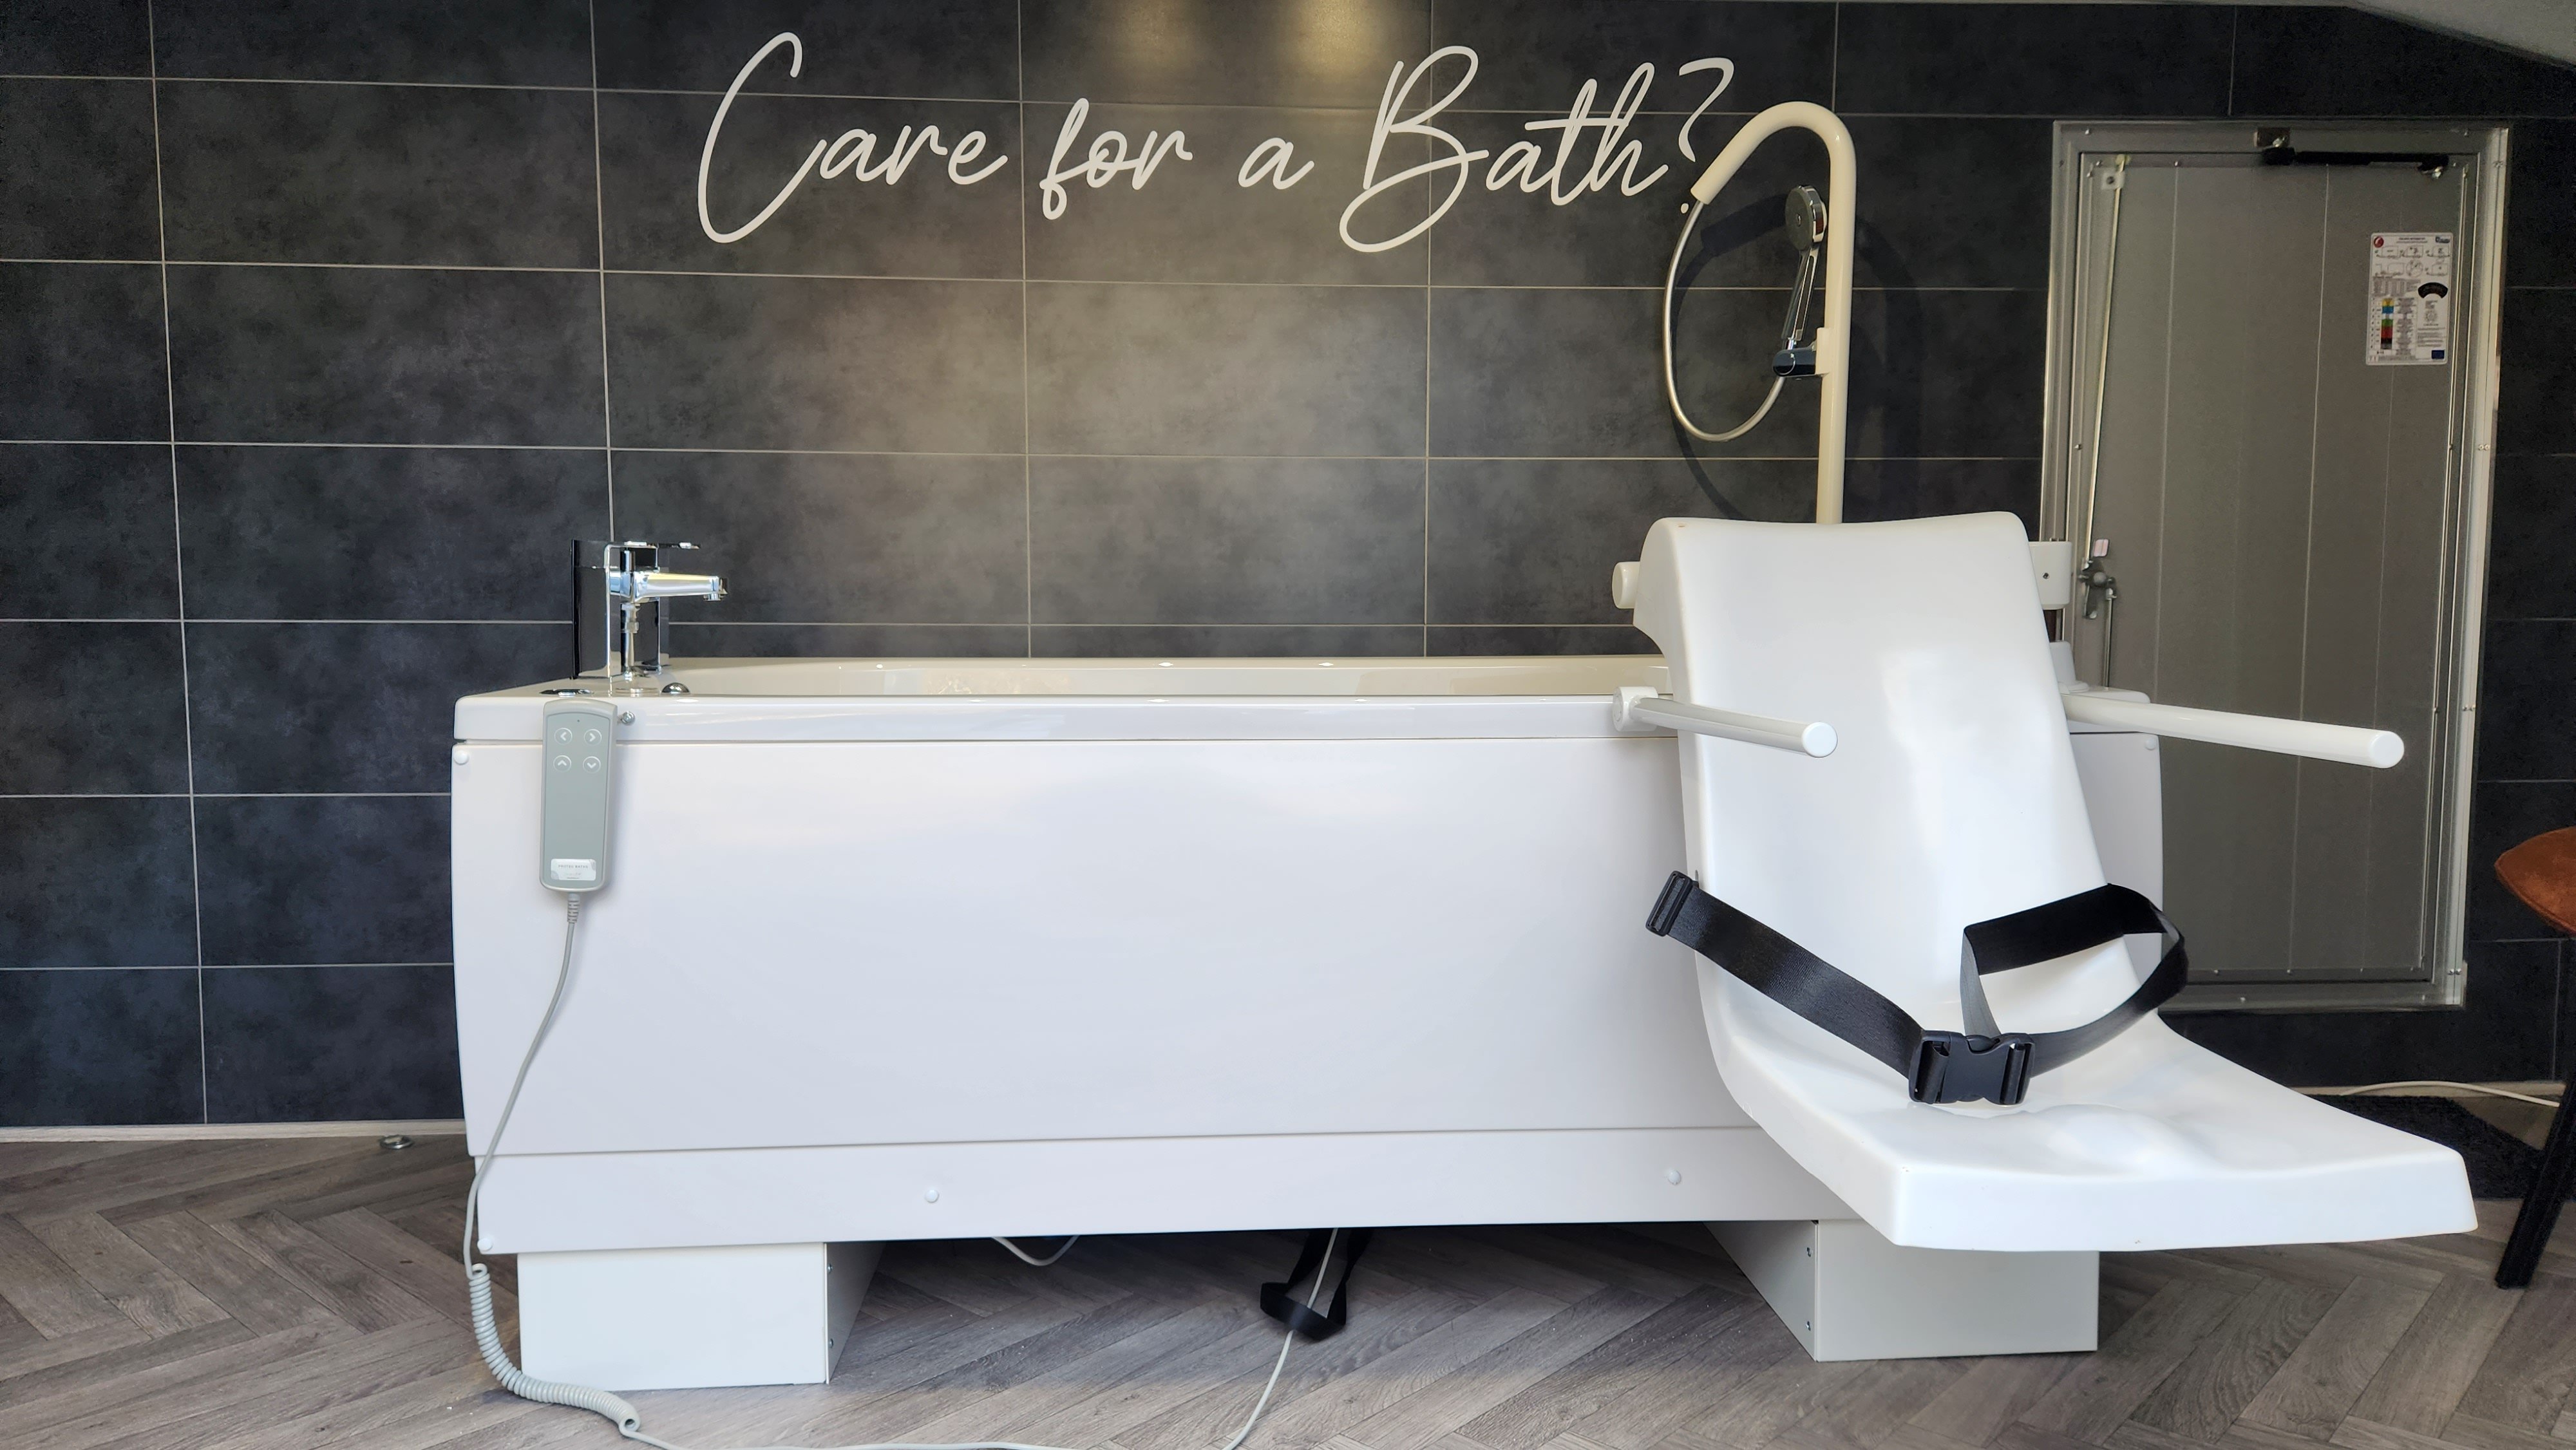 A guide to accessible baths & equipment for care homes featured image